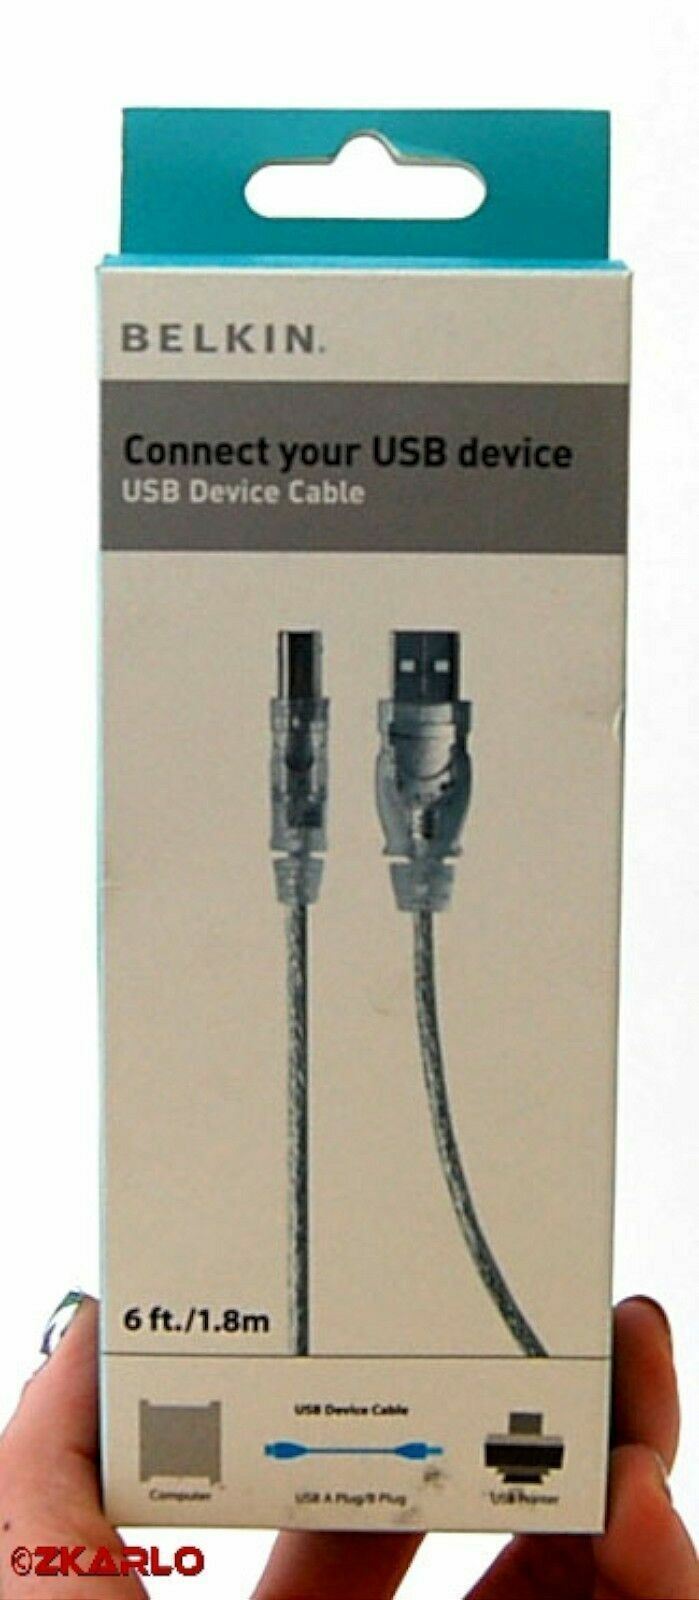 NEW Belkin F3U133 6' ft USB 2.0 CABLE Device A-B Gold iMac PC cord wire foot